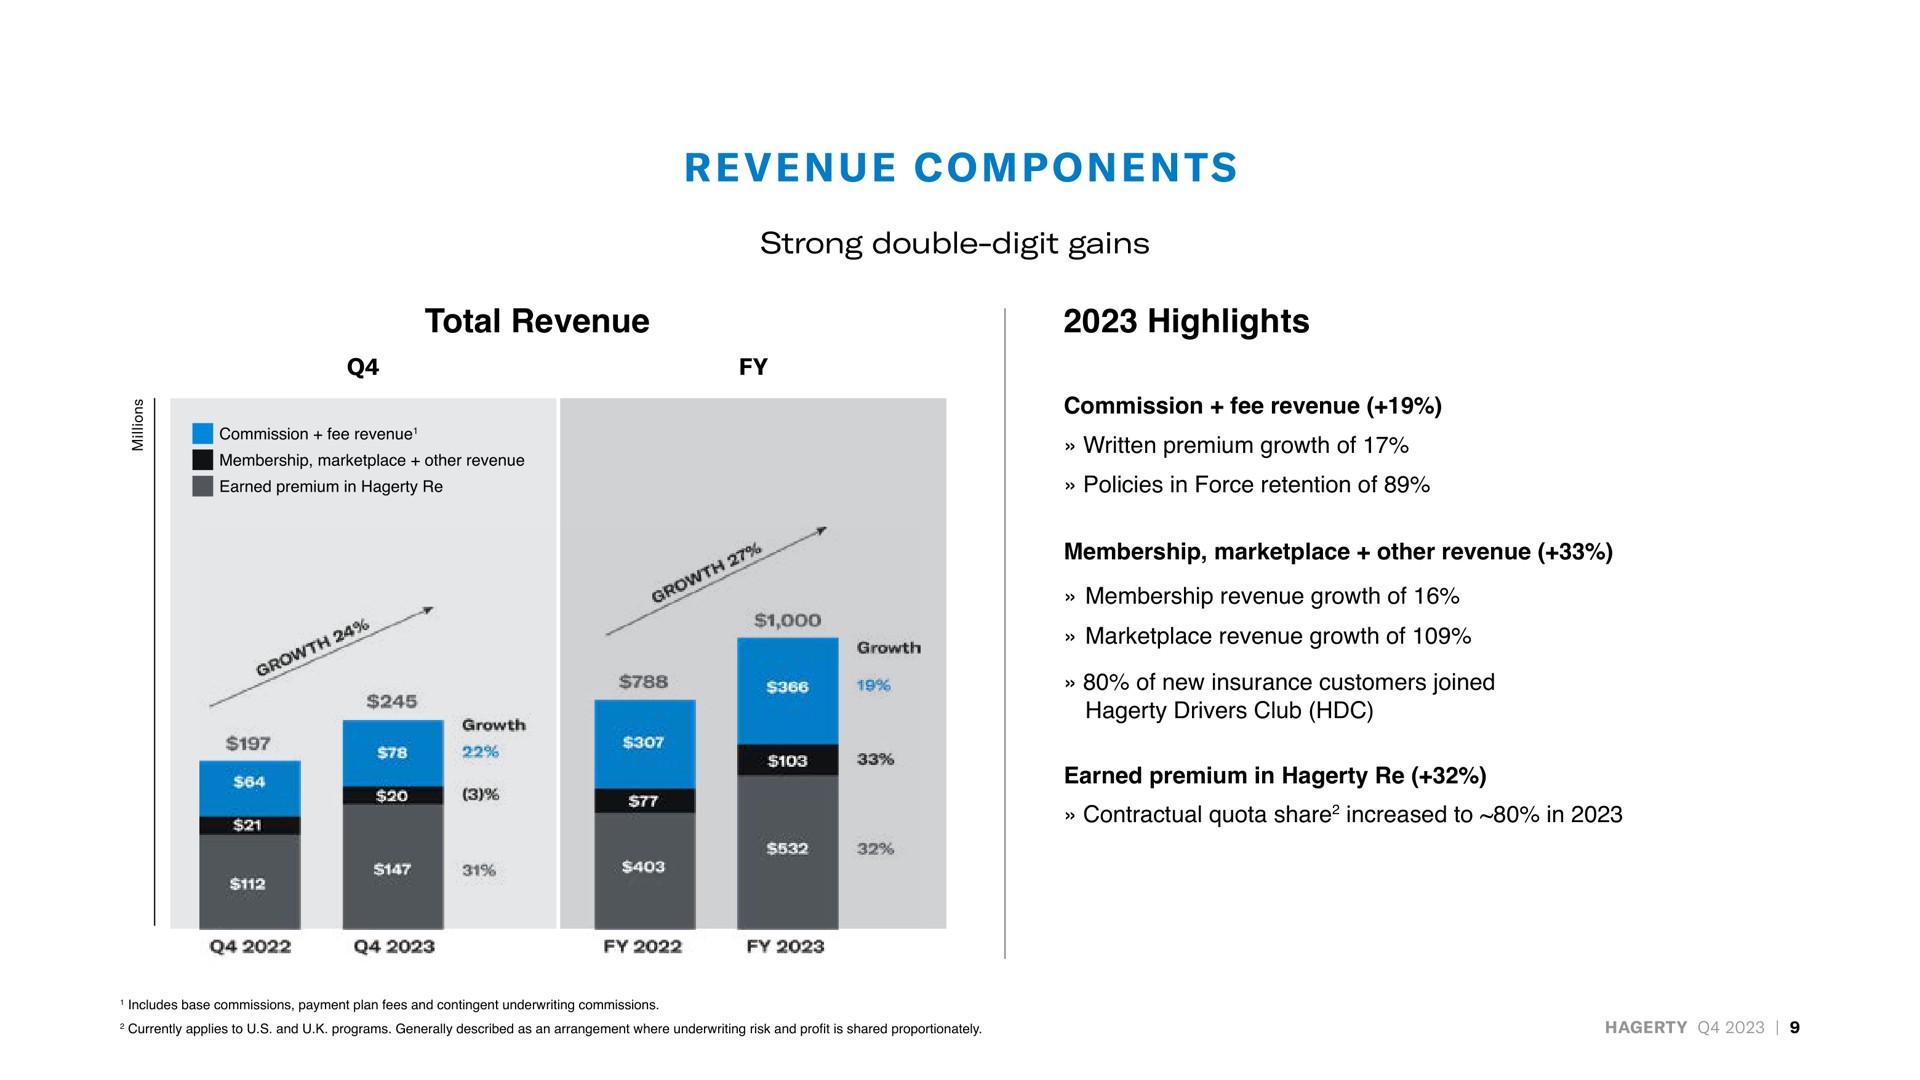 total revenue highlights commission fee revenue written premium growth of policies in force retention of membership other revenue membership revenue growth of revenue growth of of new insurance customers joined drivers club earned premium in contractual quota share increased to in components | Hagerty